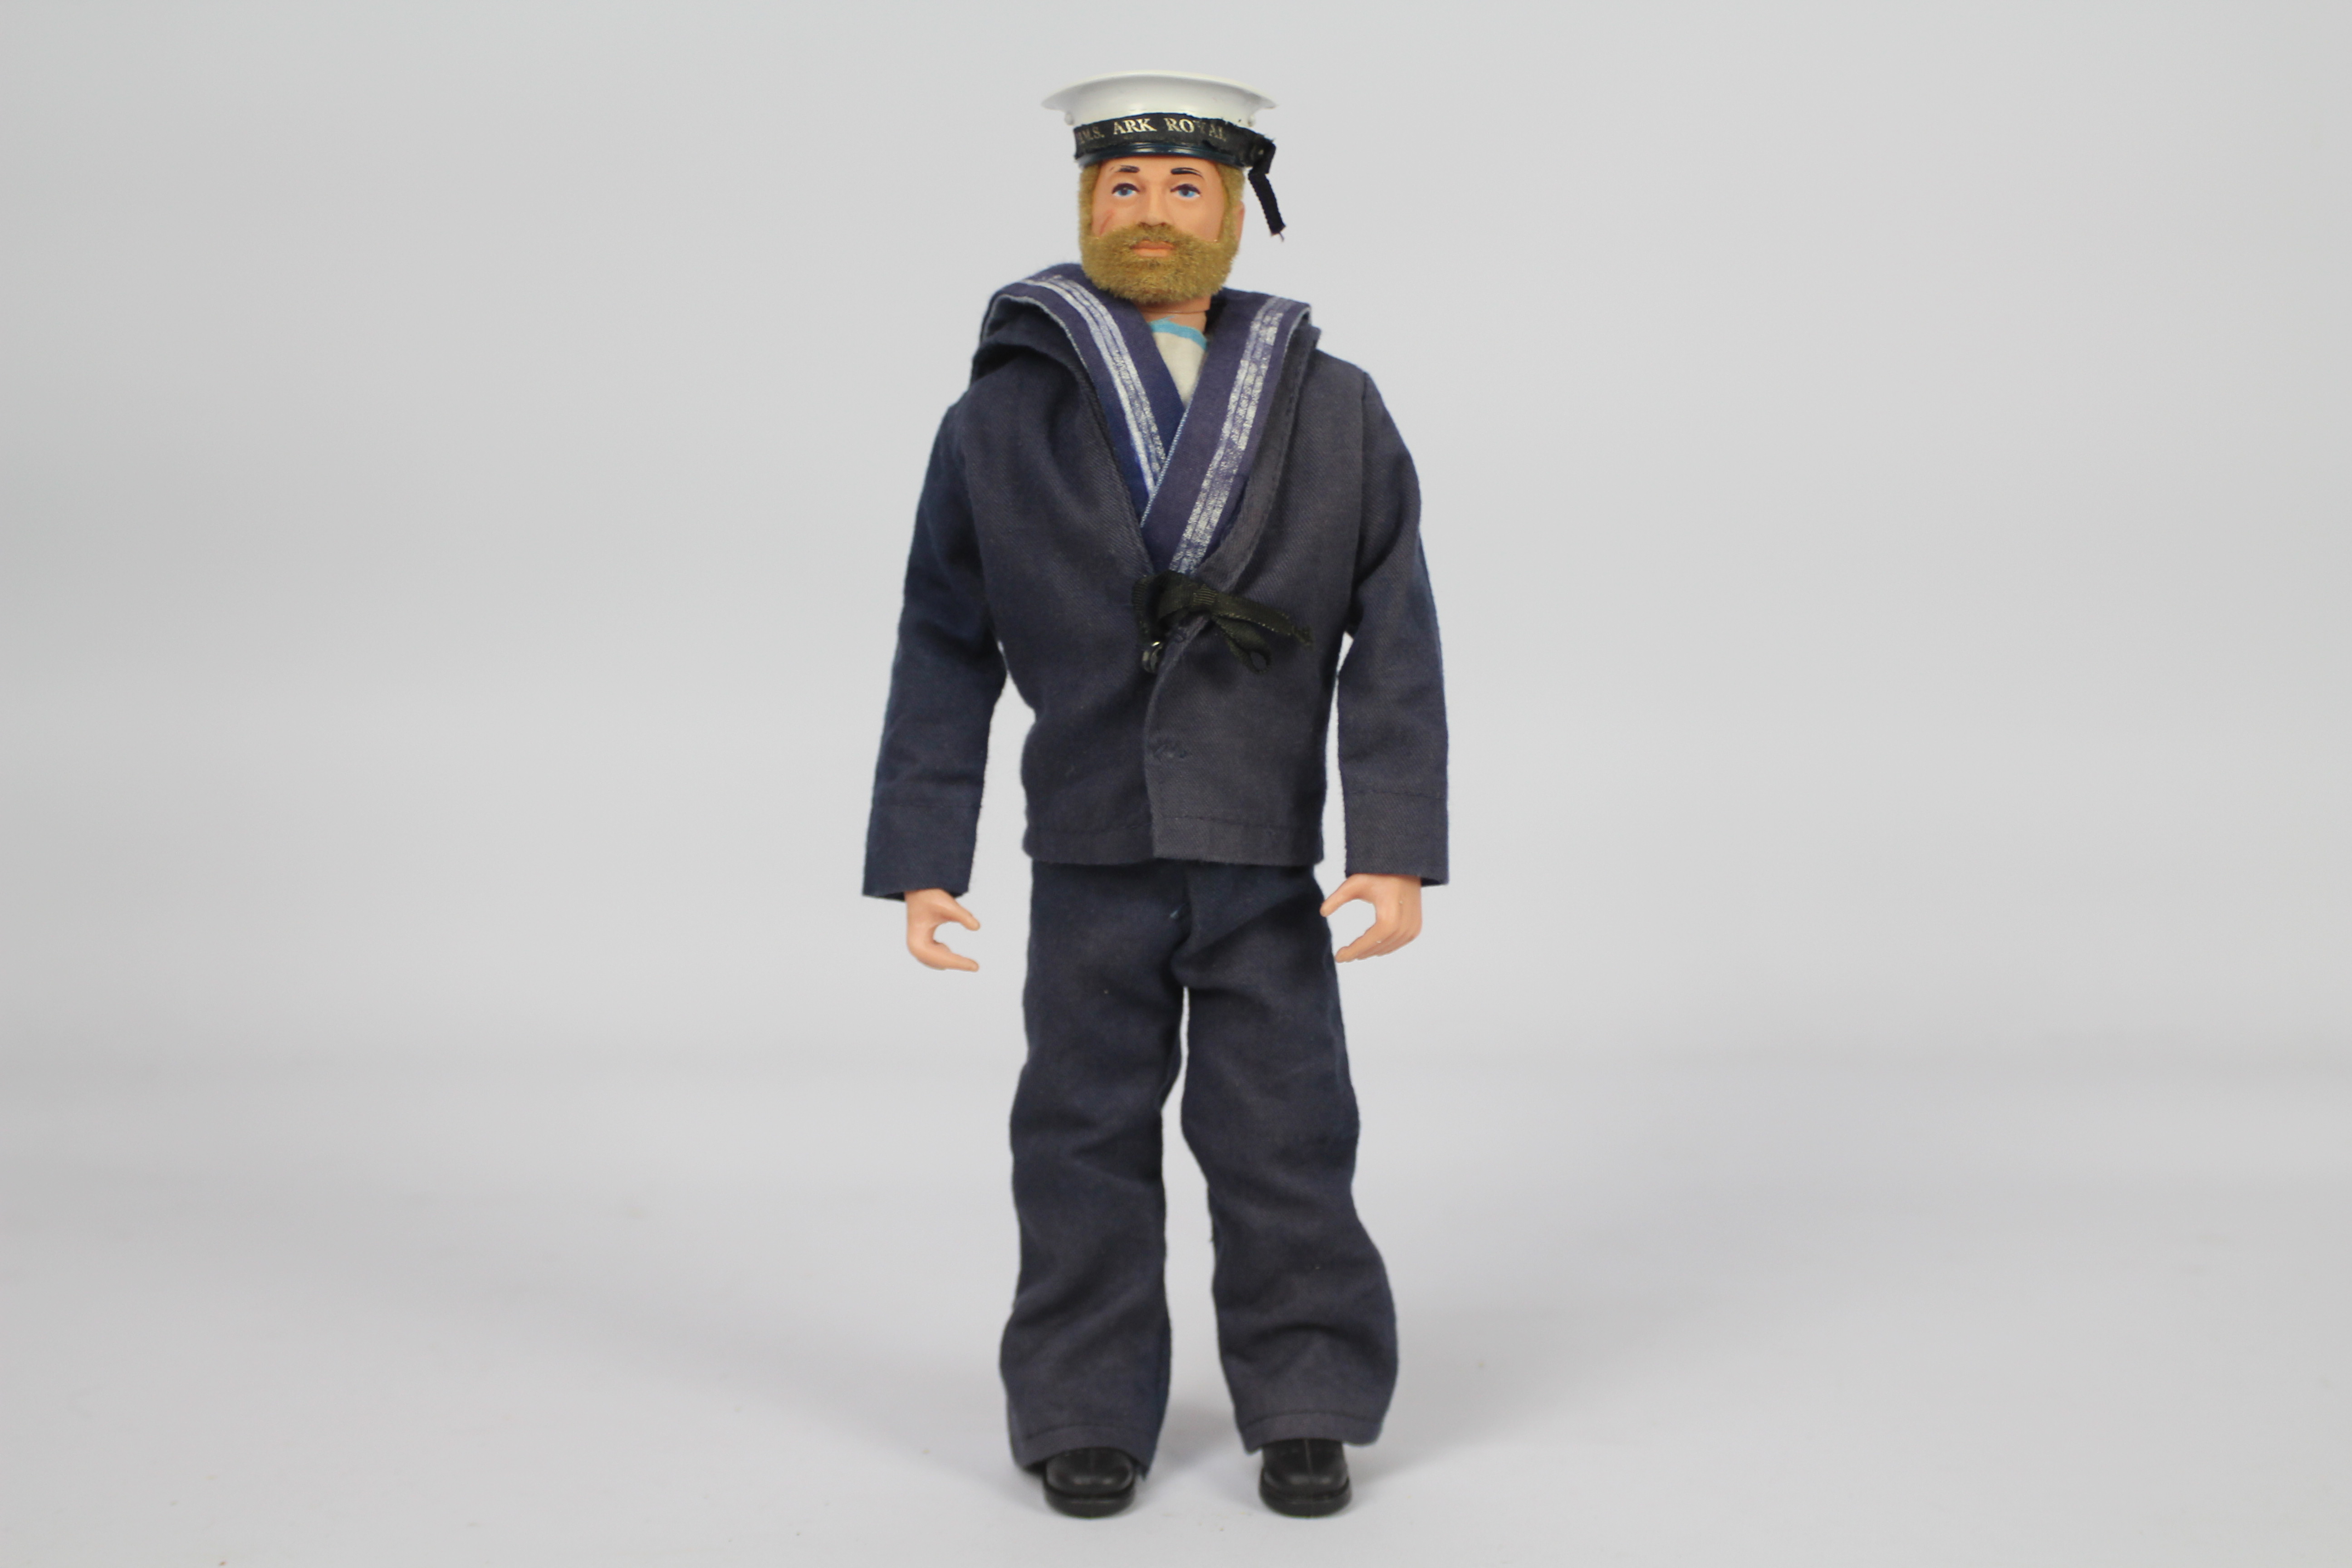 Palitoy, Action Man - A Palitoy Action Man figure in Sailor outfit. - Image 3 of 9